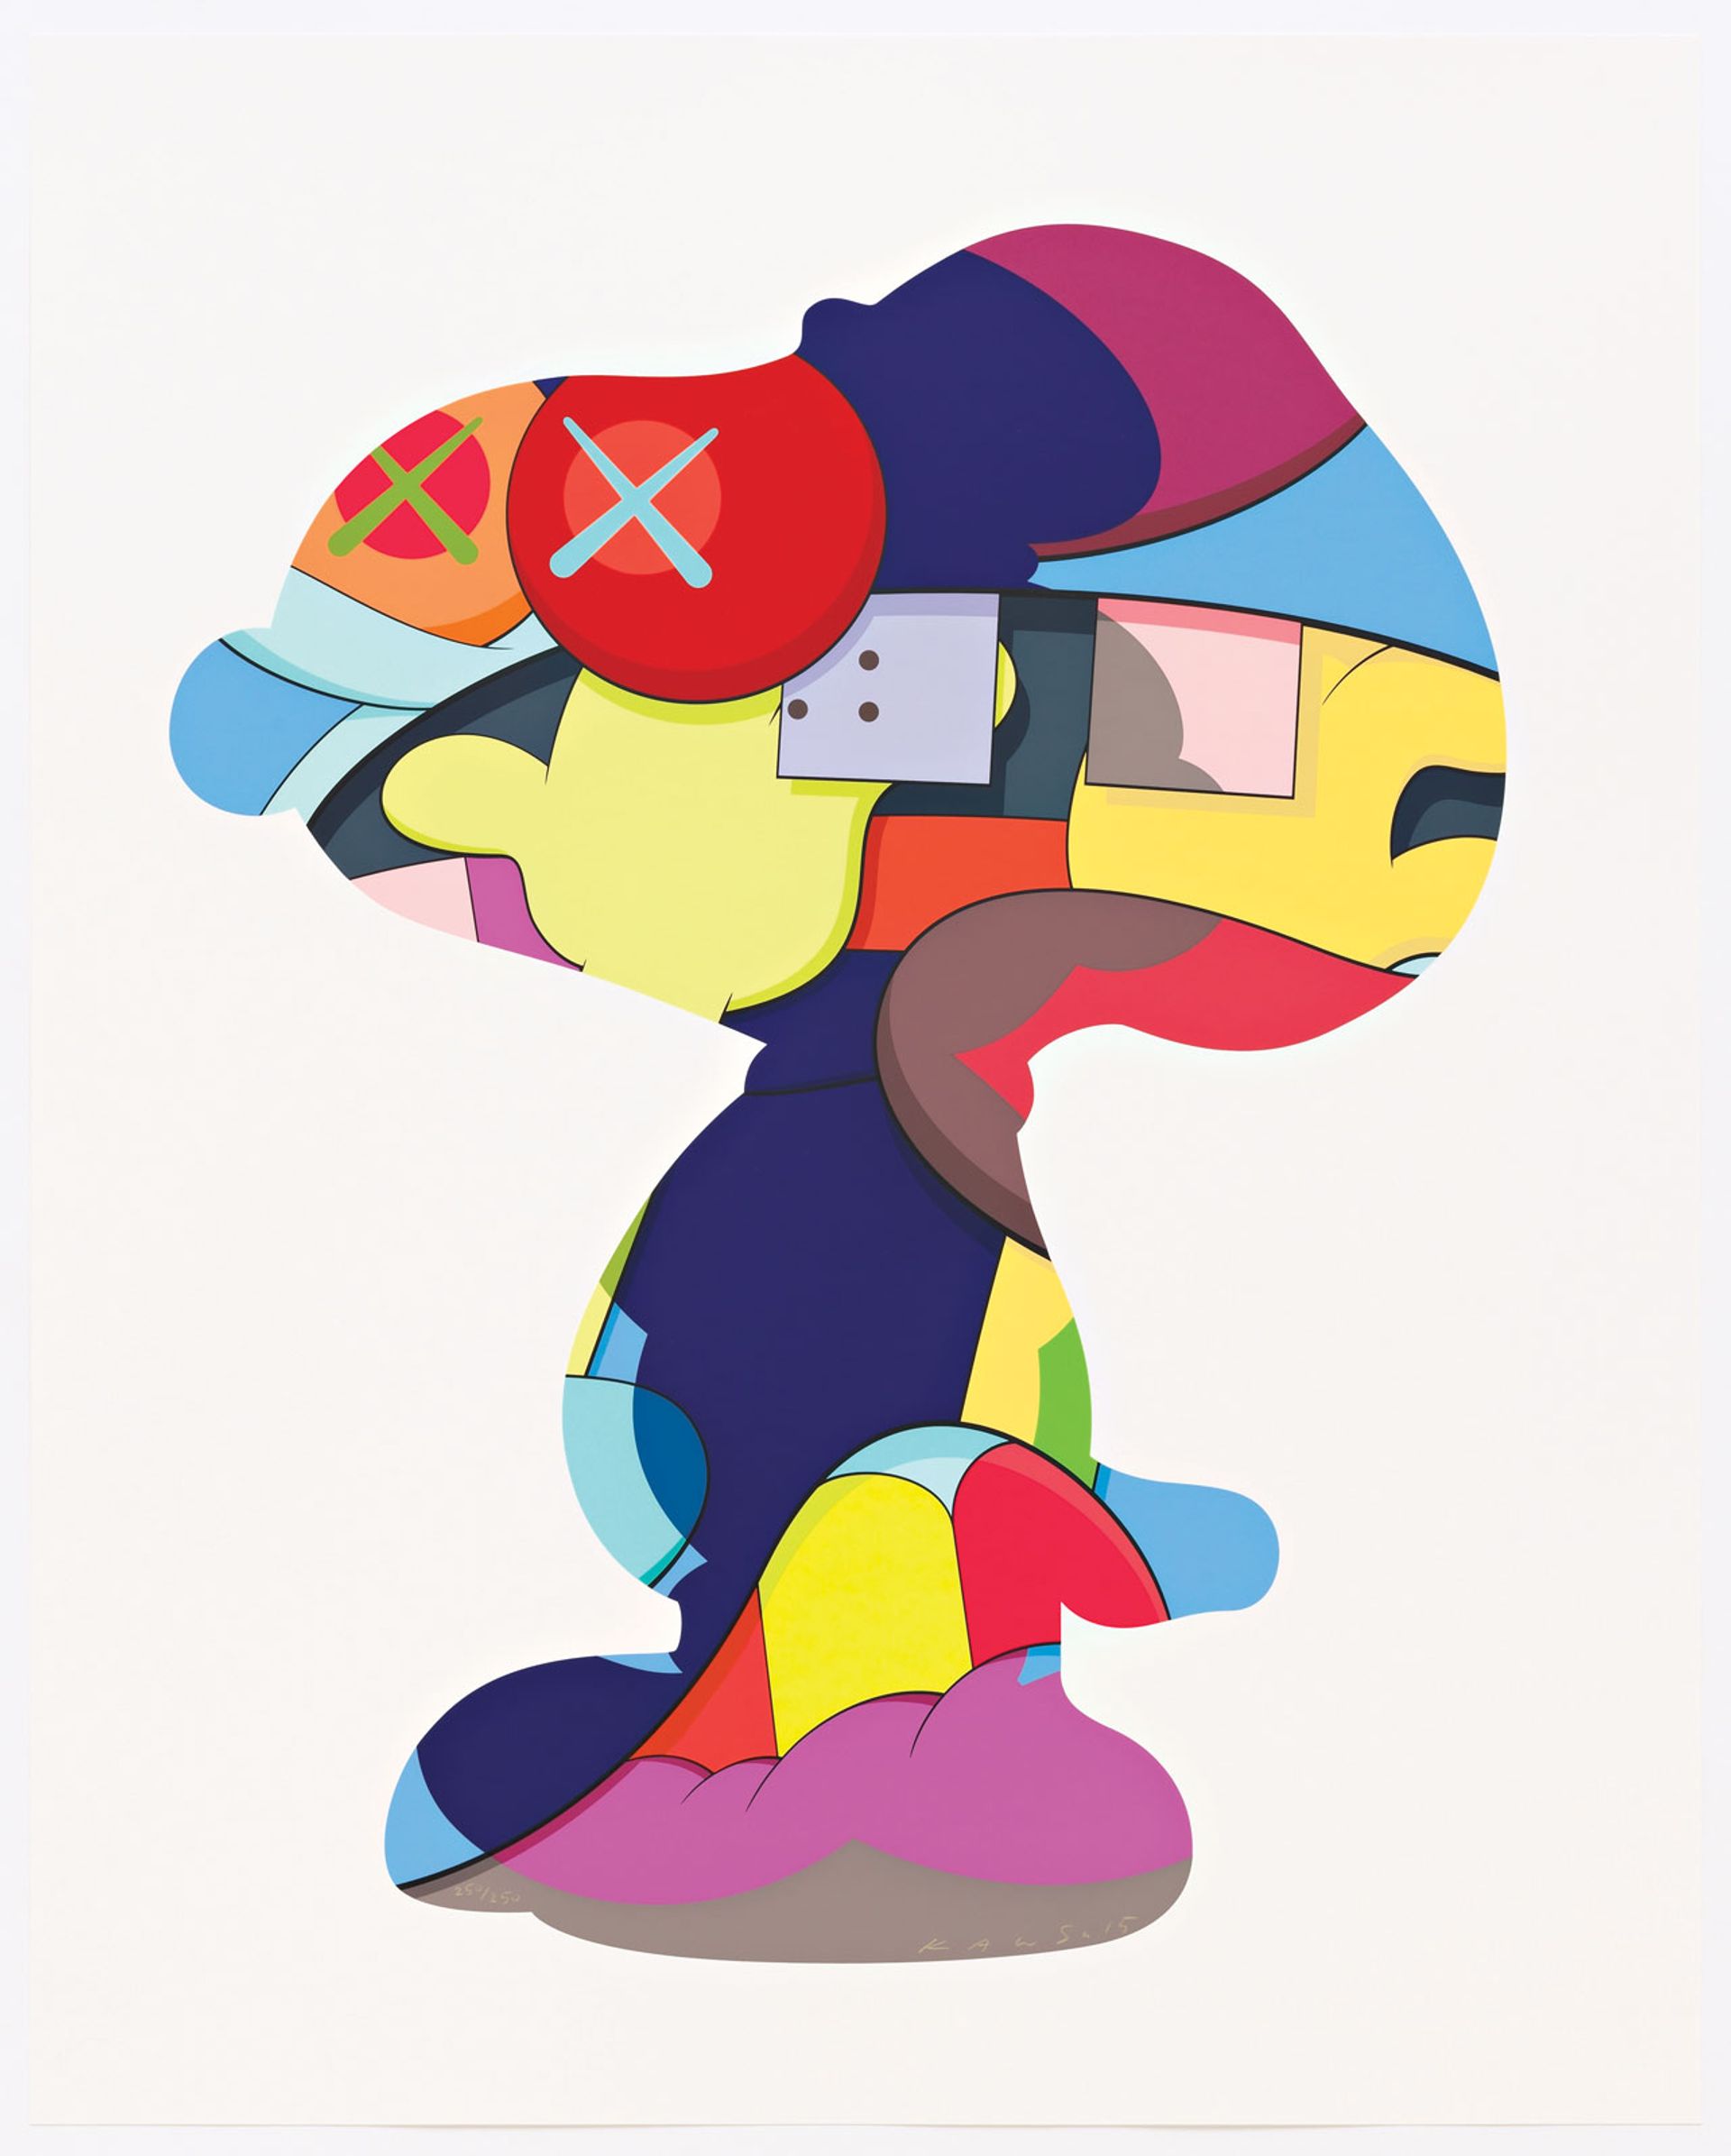 No One’s Home (2015), KAWS’s take on Snoopy, features in the London show Courtesy of Pace Editions